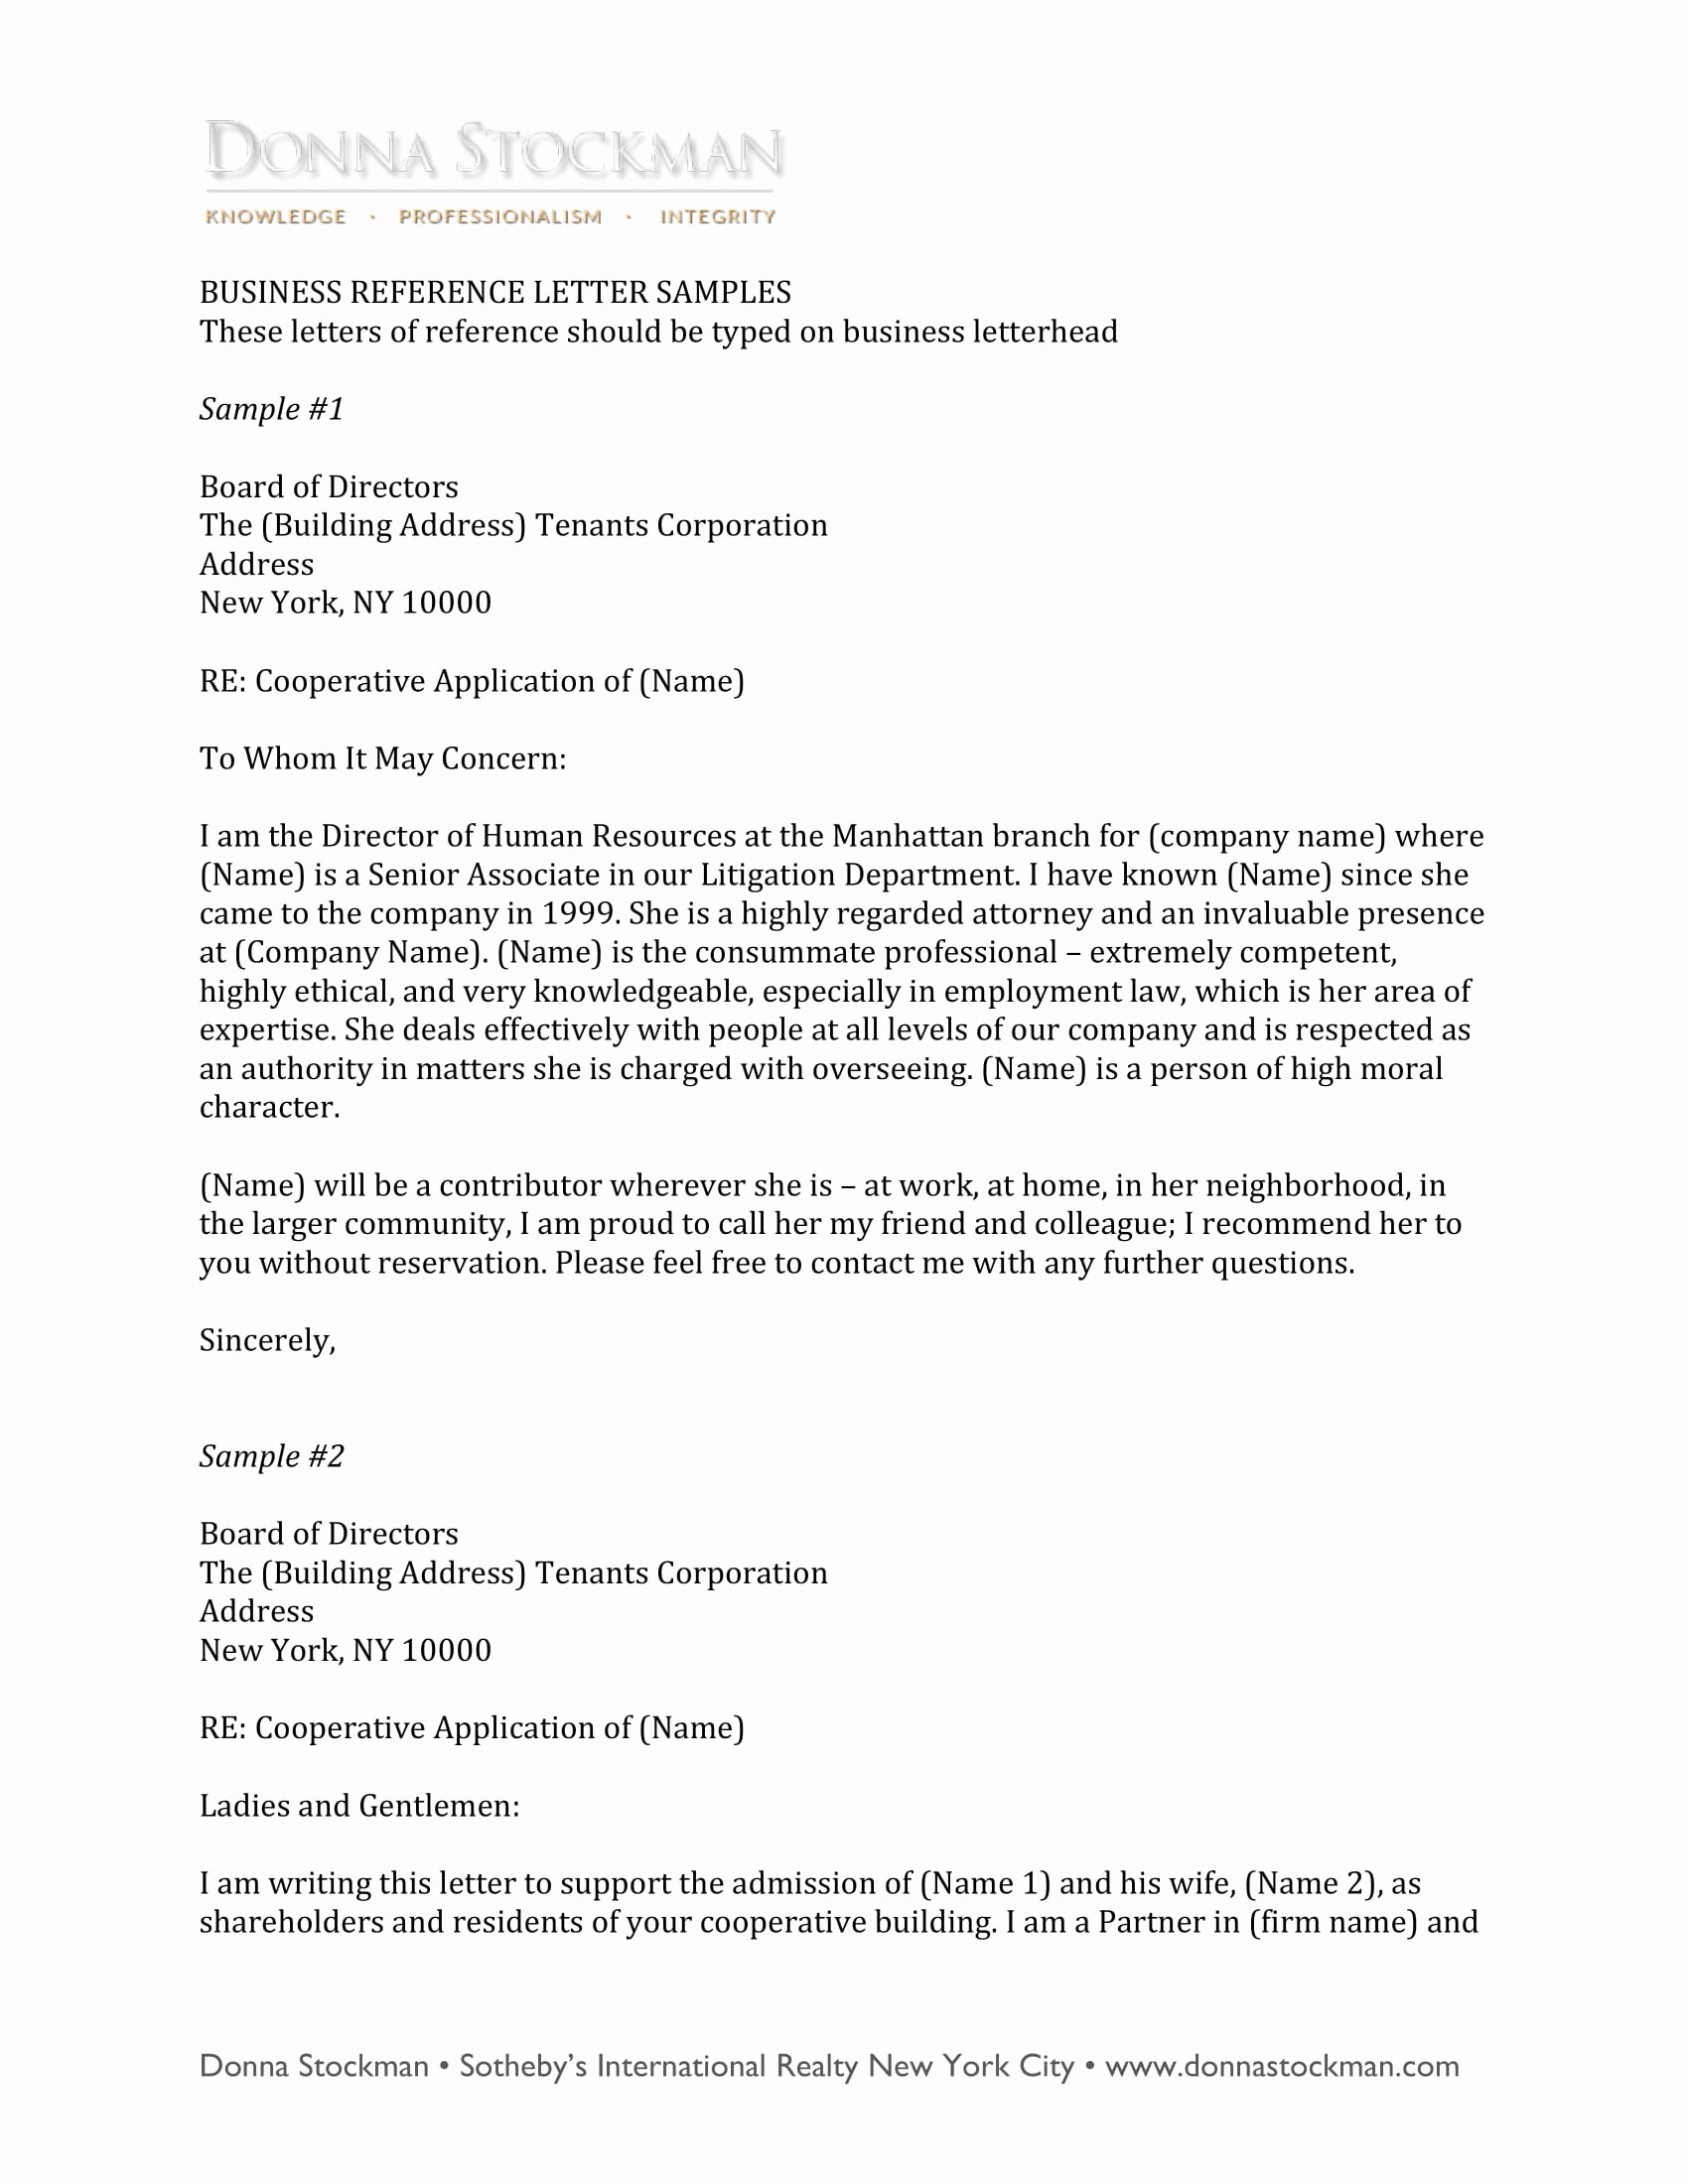 Formal Letter Of Recommendation Template Beautiful 10 Business Reference Letter Examples Pdf